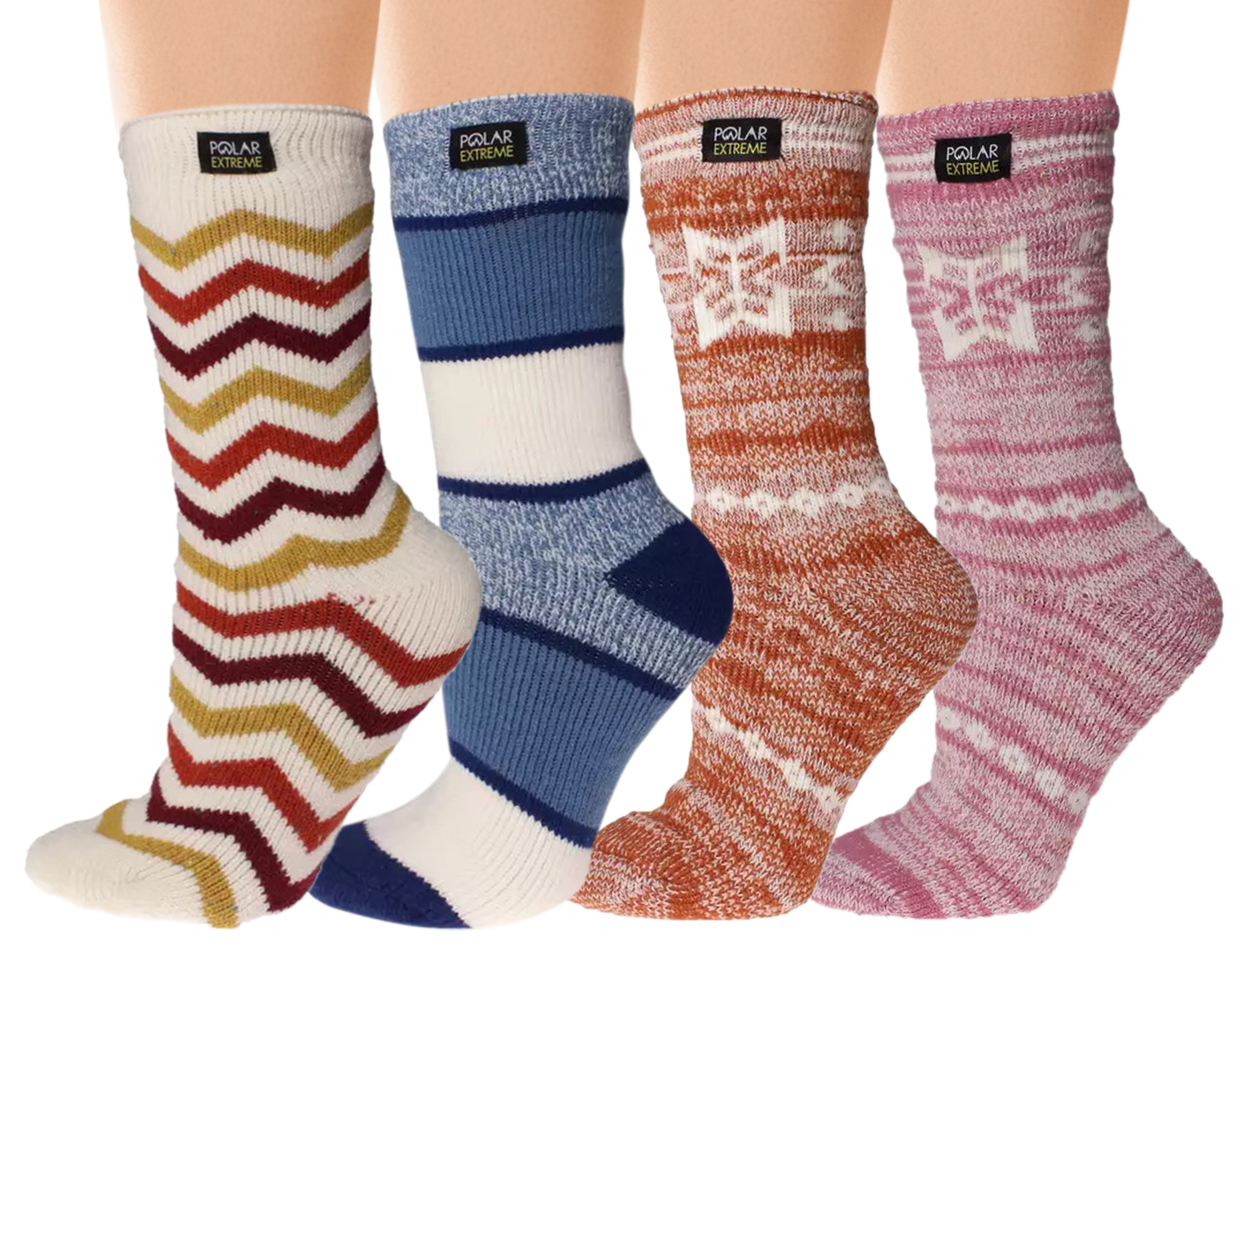 4-Pairs: Women's Polar Extreme Insulated Thermal Ultra-Soft Winter Warm Crew Socks